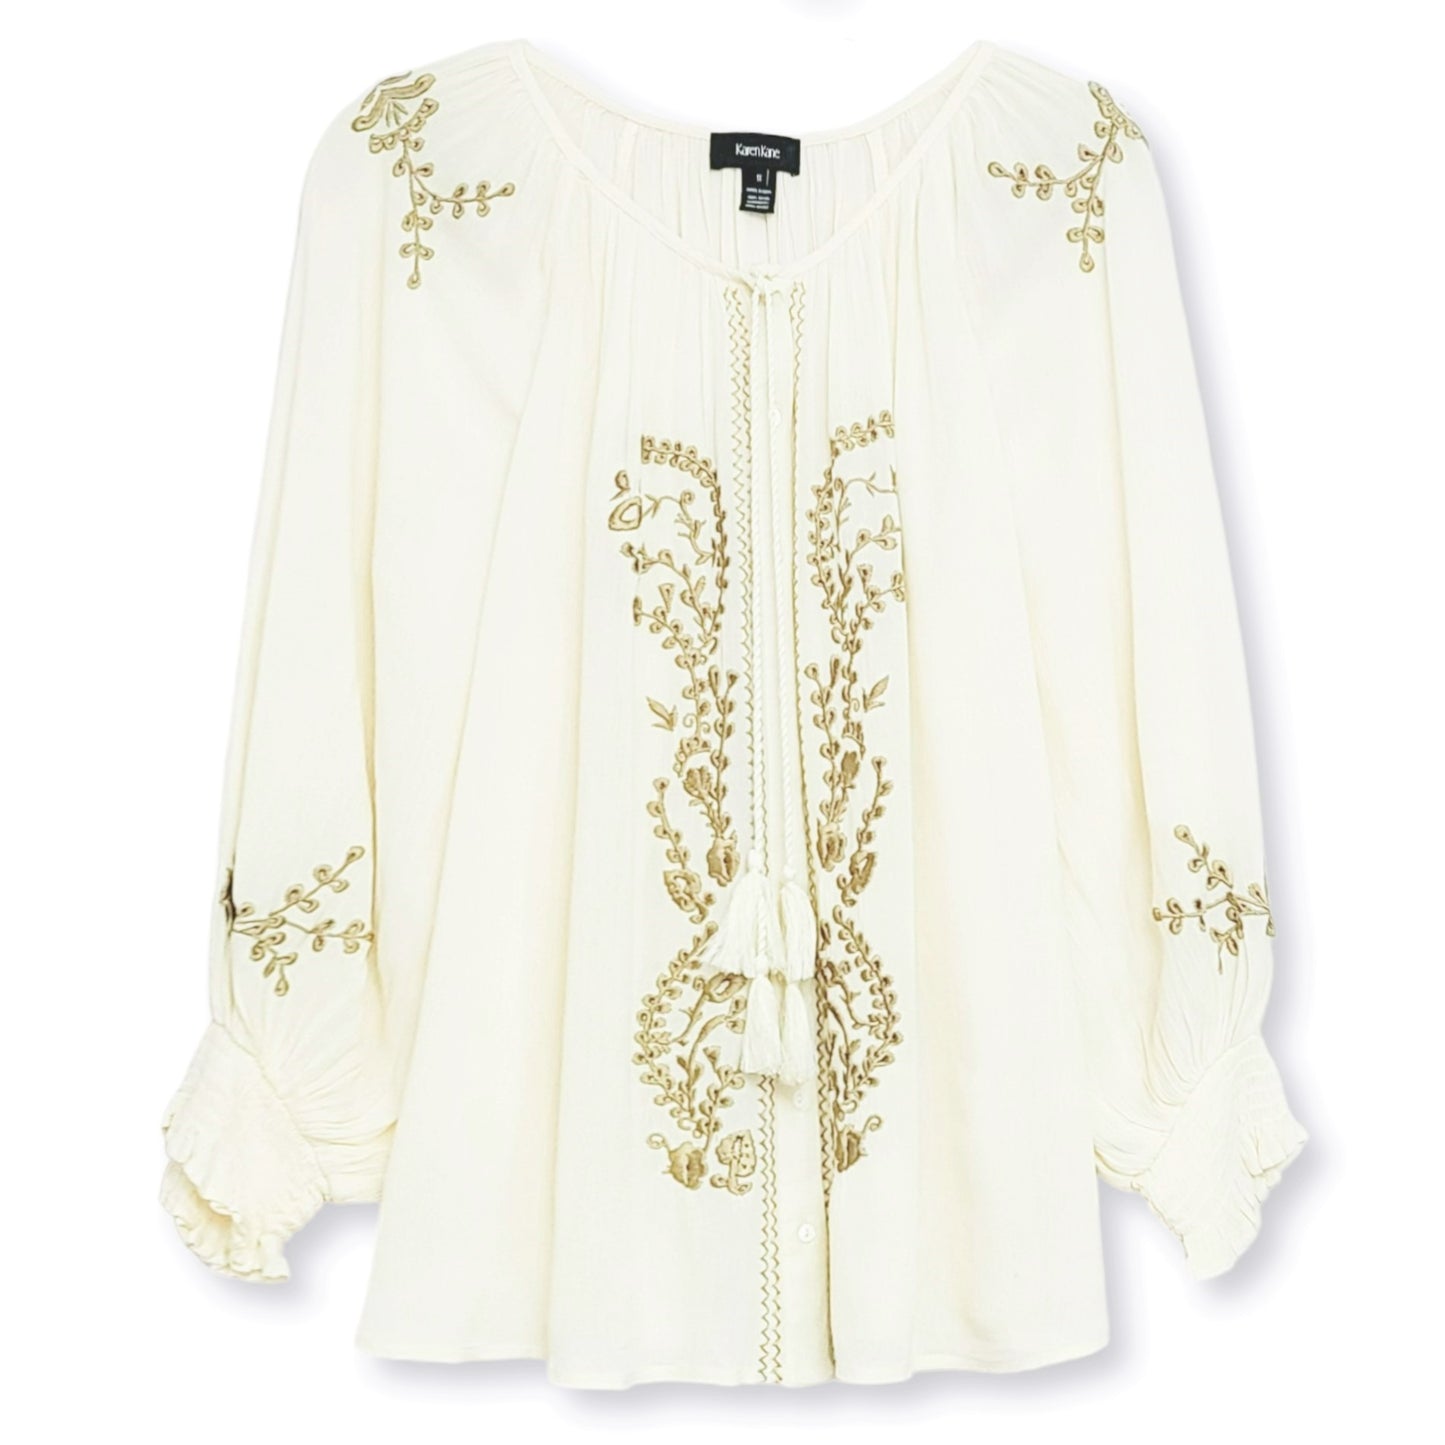 KAREN KANE Plus Floral Embroidered Tassels Button Front Peasant Blouse Top